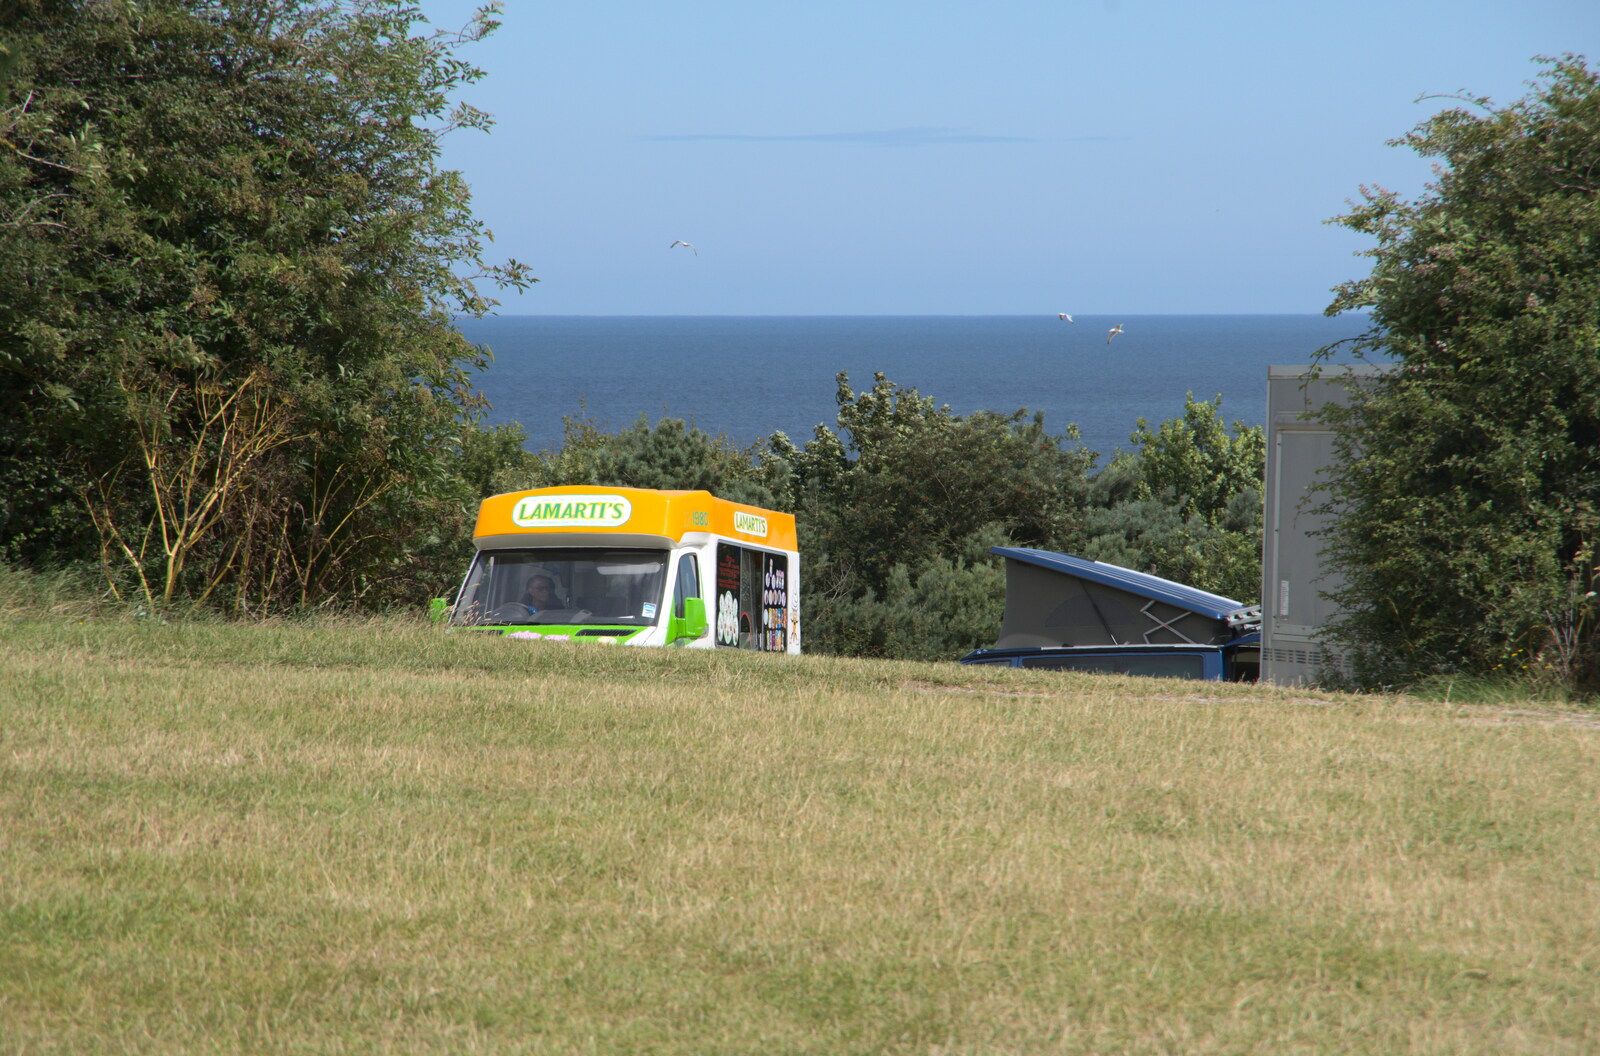 An ice-cream van lurks over the hill from Camping on the Coast, East Runton, North Norfolk - 25th July 2020